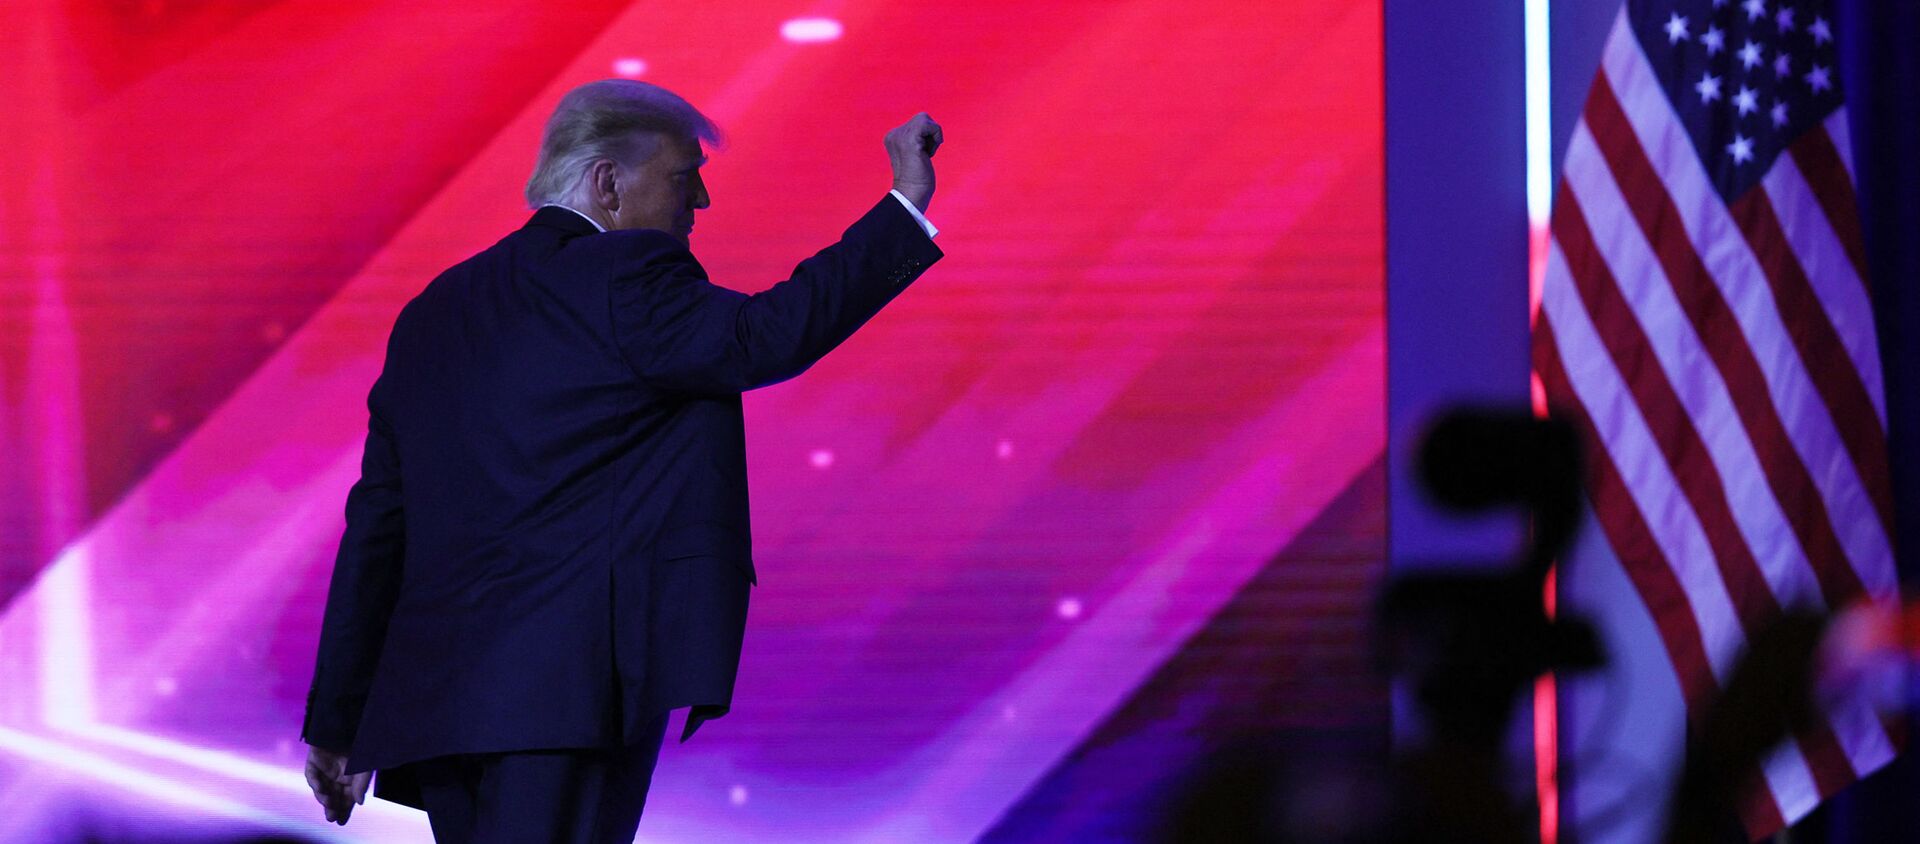 Former President Donald Trump walks off stage after an address to the Conservative Political Action Conference (CPAC) held in the Hyatt Regency on February 28, 2021 in Orlando, Florida.  - Sputnik International, 1920, 06.03.2021